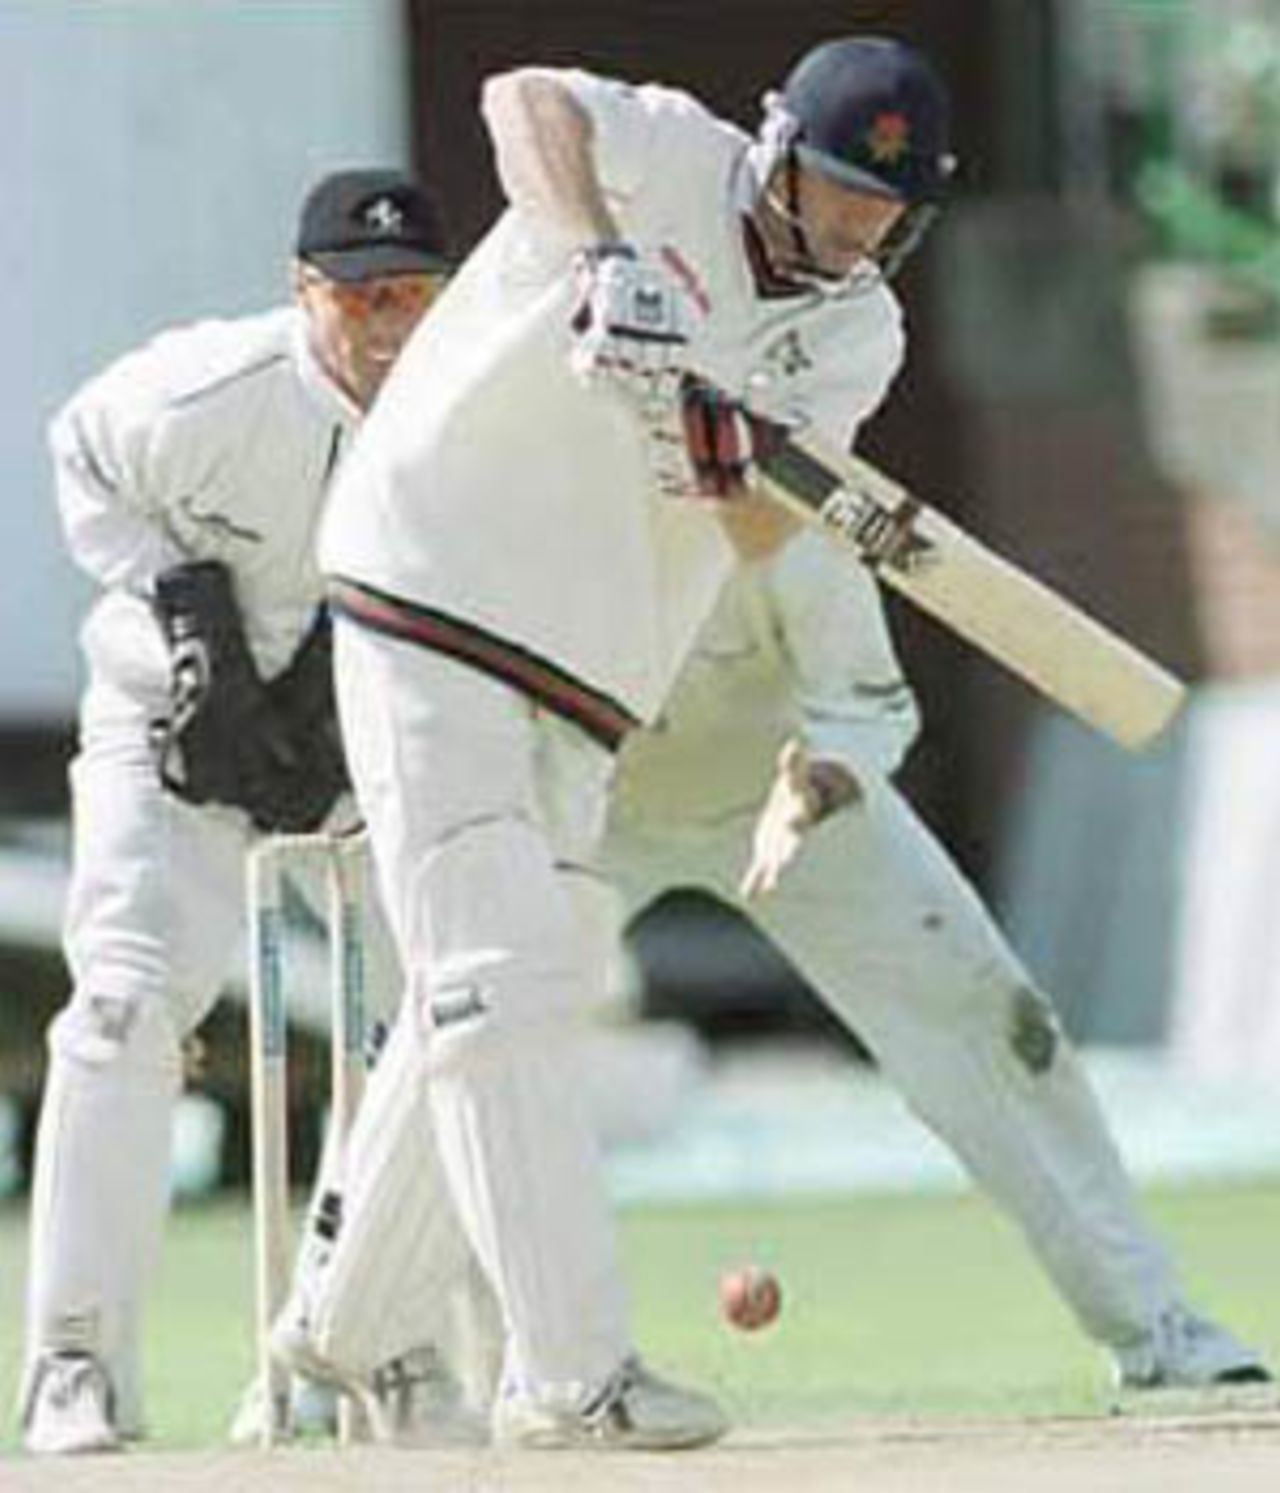 Chris Schofield plays a defensive shot, PPP healthcare County Championship Division One, 2000, Lancashire v Kent, Old Trafford, Manchester, 17-20 August 2000(Day 3).